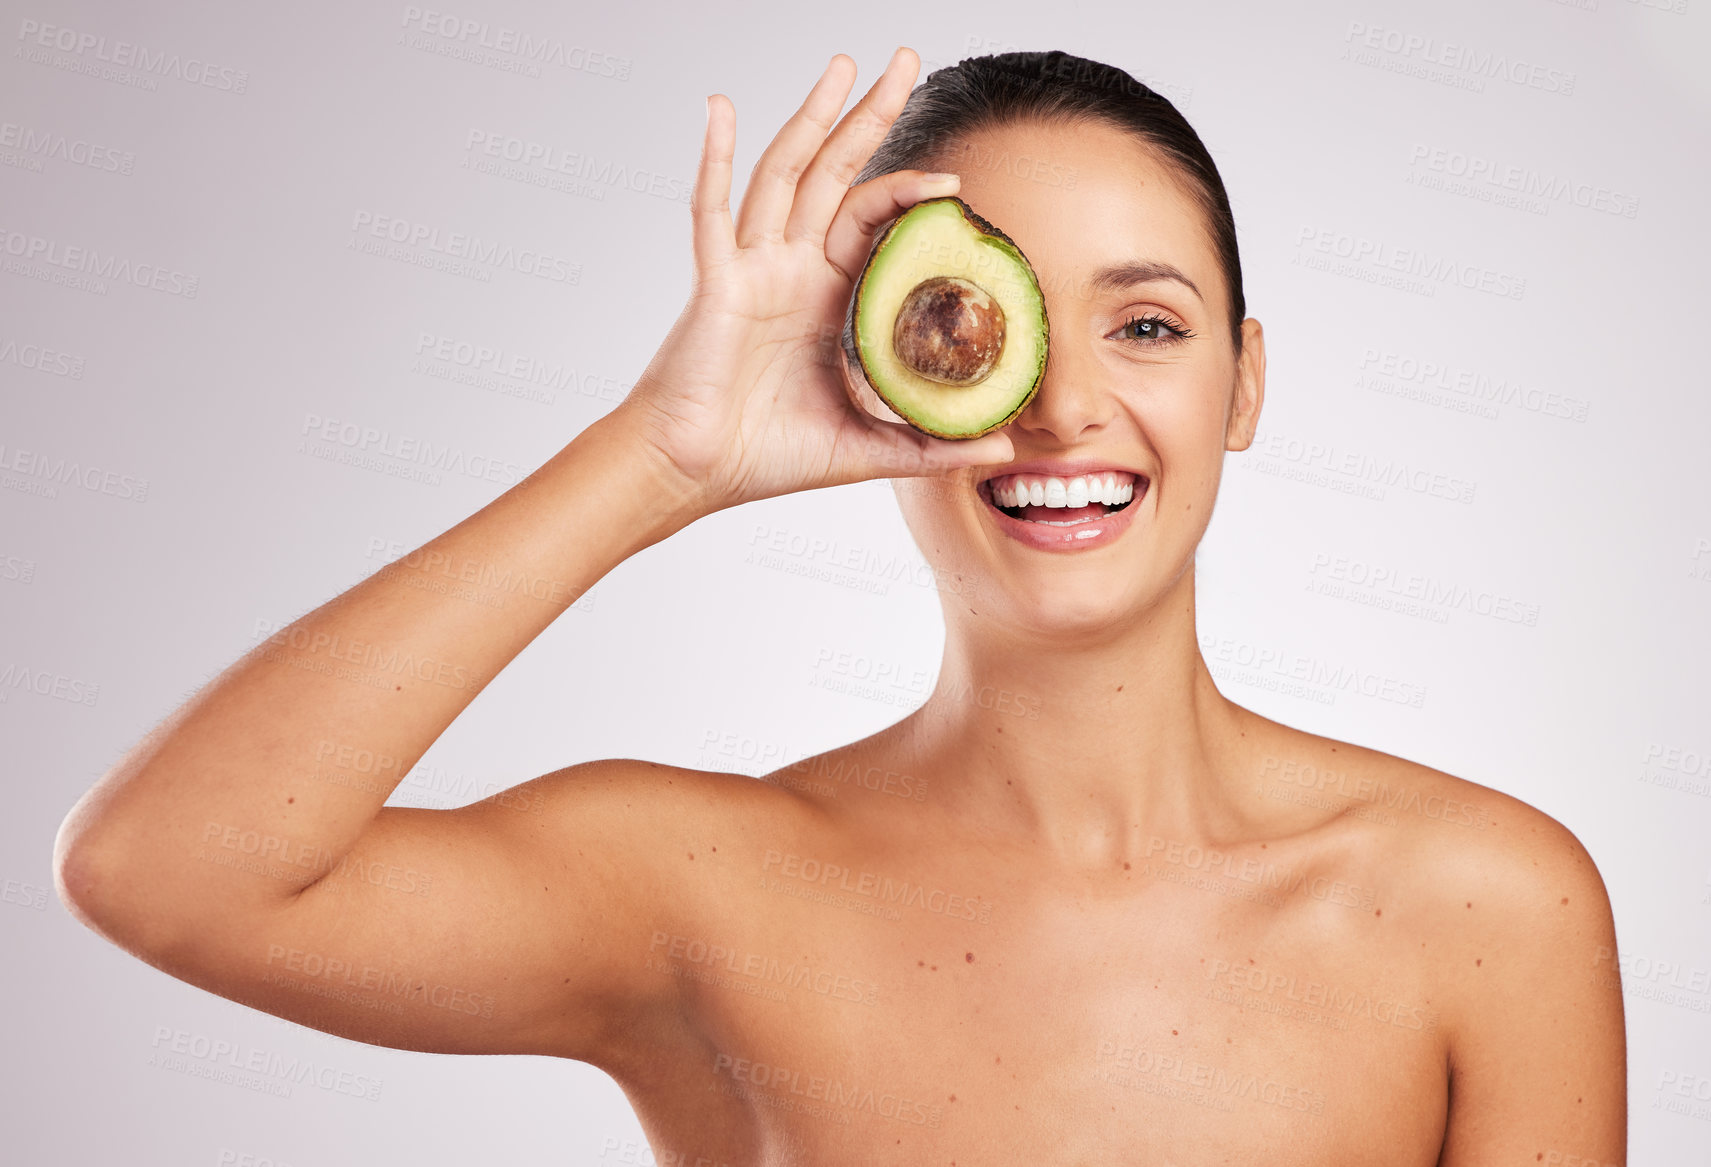 Buy stock photo Shot of an attractive young woman holding an avocado against a studio background